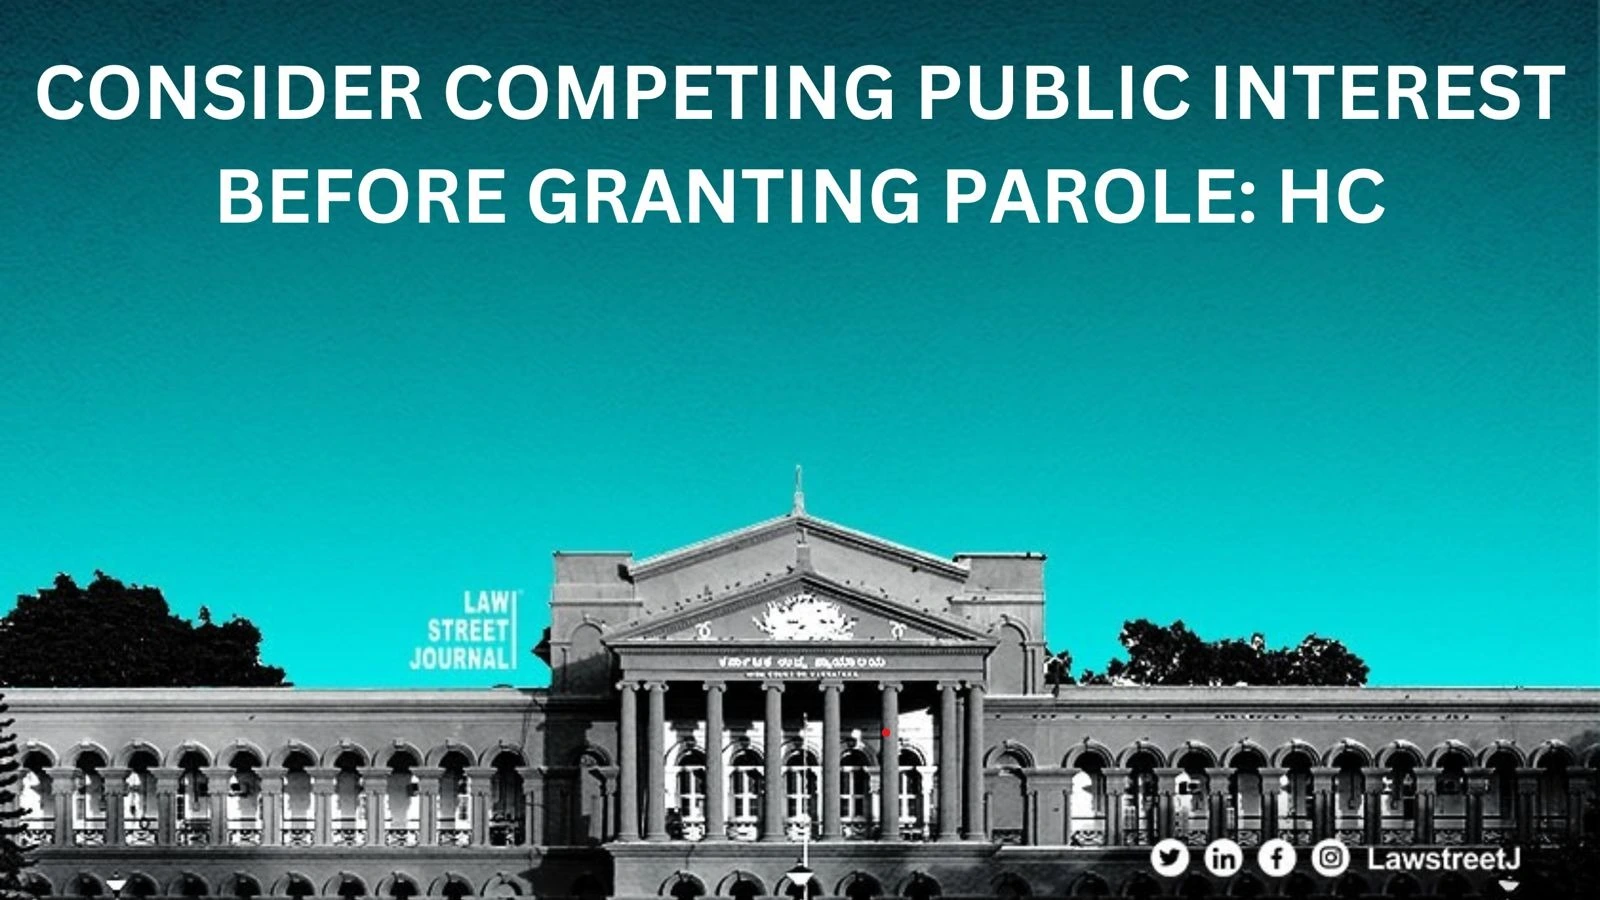 competing-public-interest-should-be-considered-while-granting-parole-karnataka-hc-rejects-serial-killer-s-parole-plea